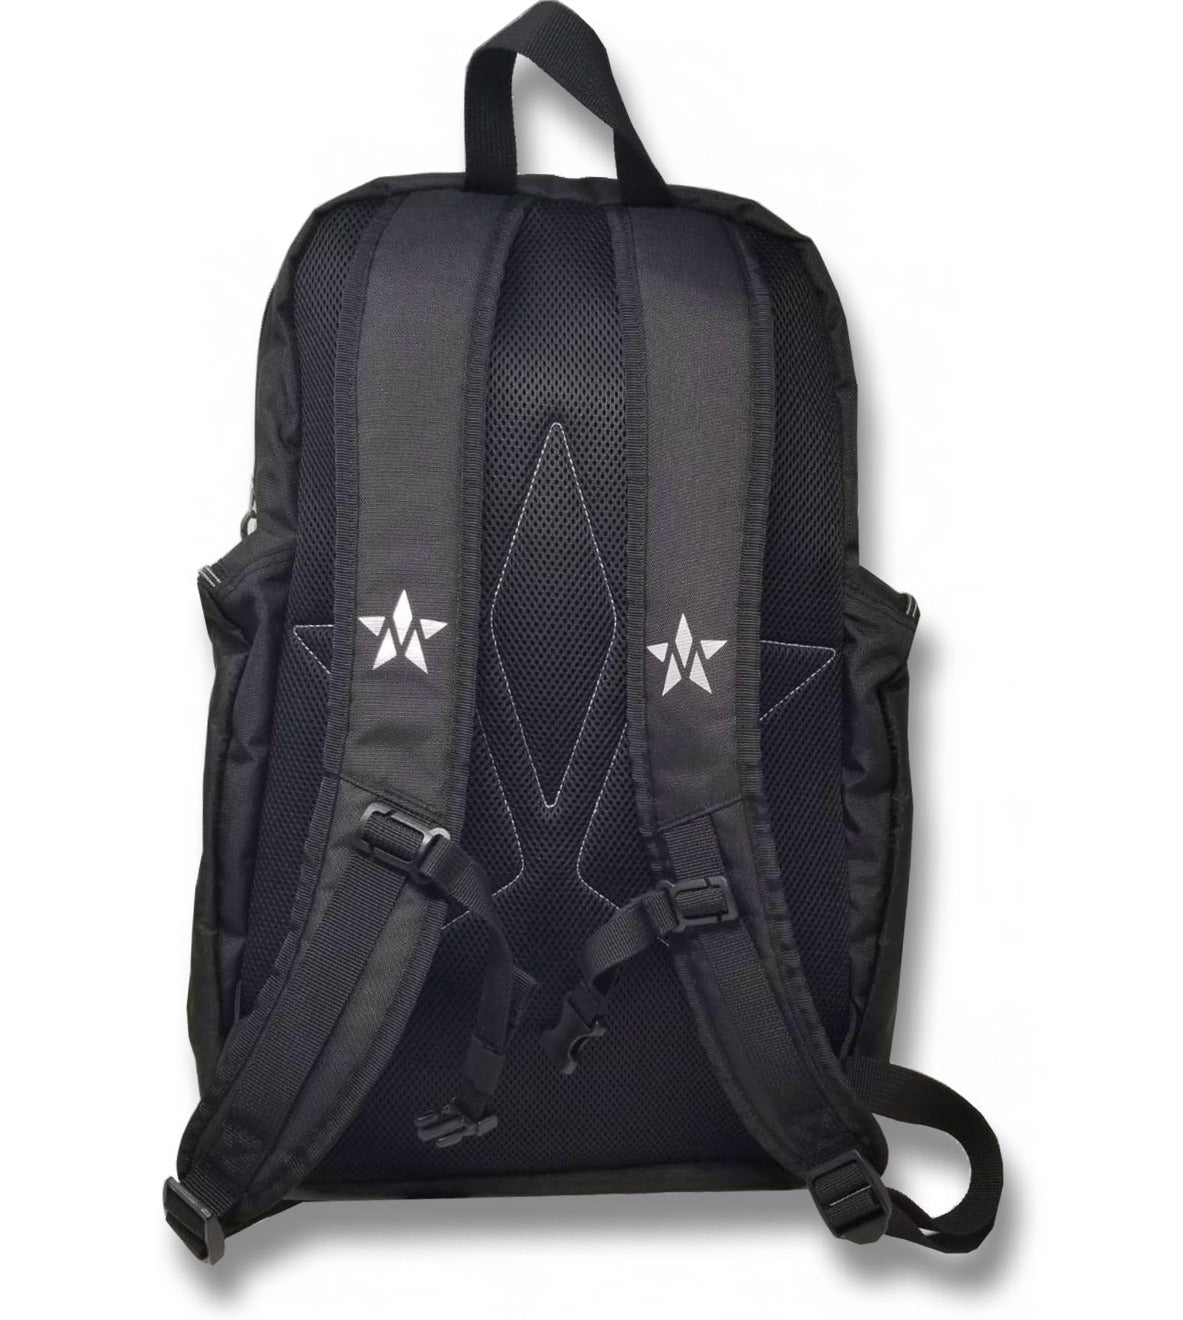 A black Master Athletics All-Star backpack with a star on it.